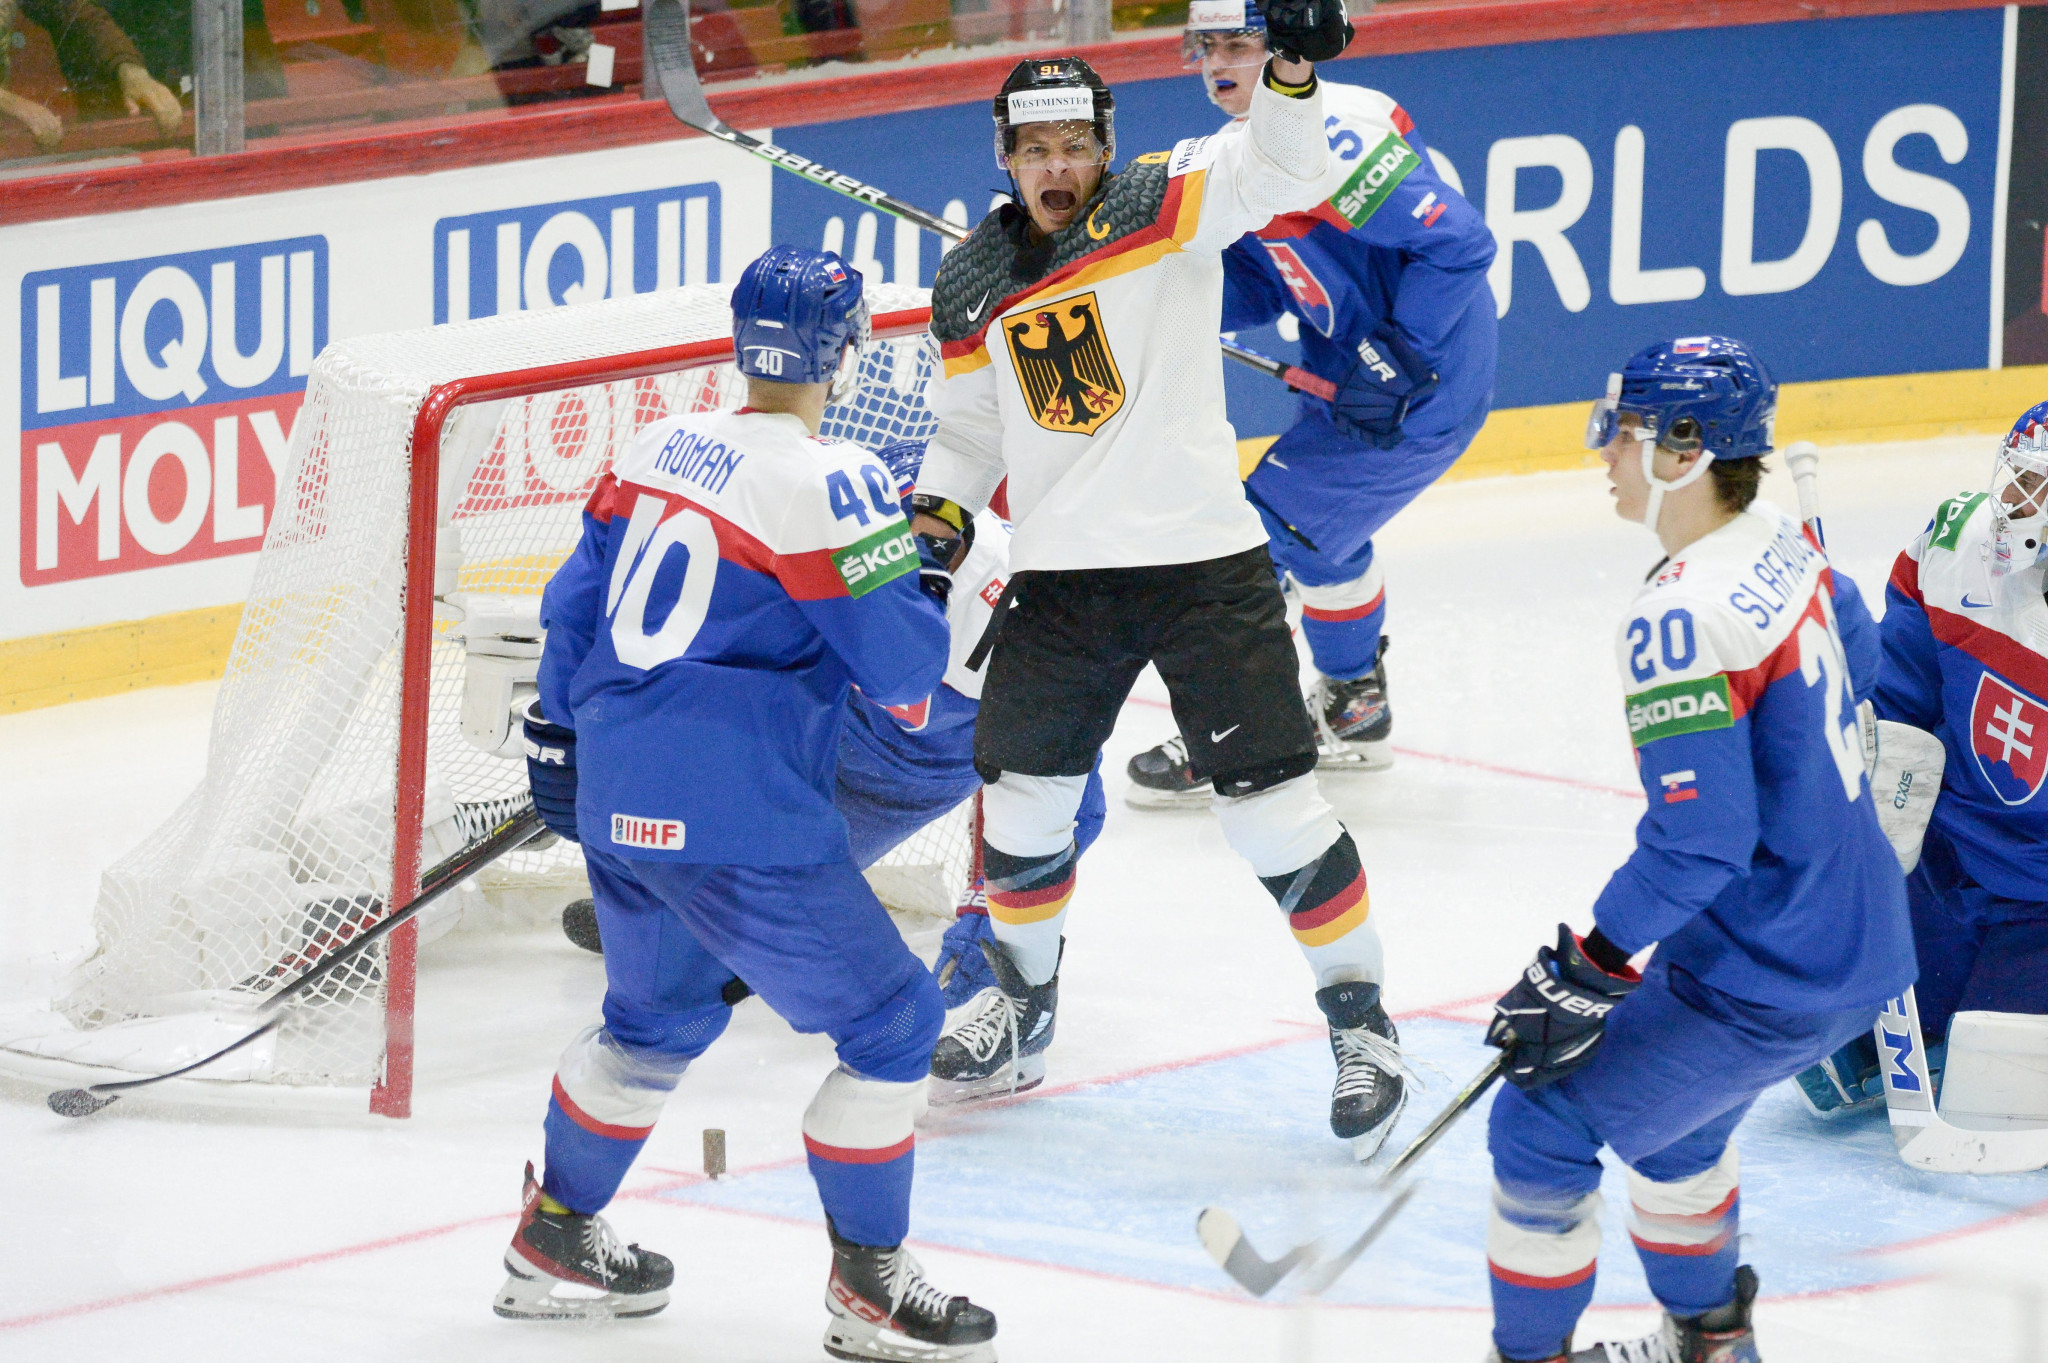 Germany earned a narrow win over Slovakia in Group A ©Getty Images